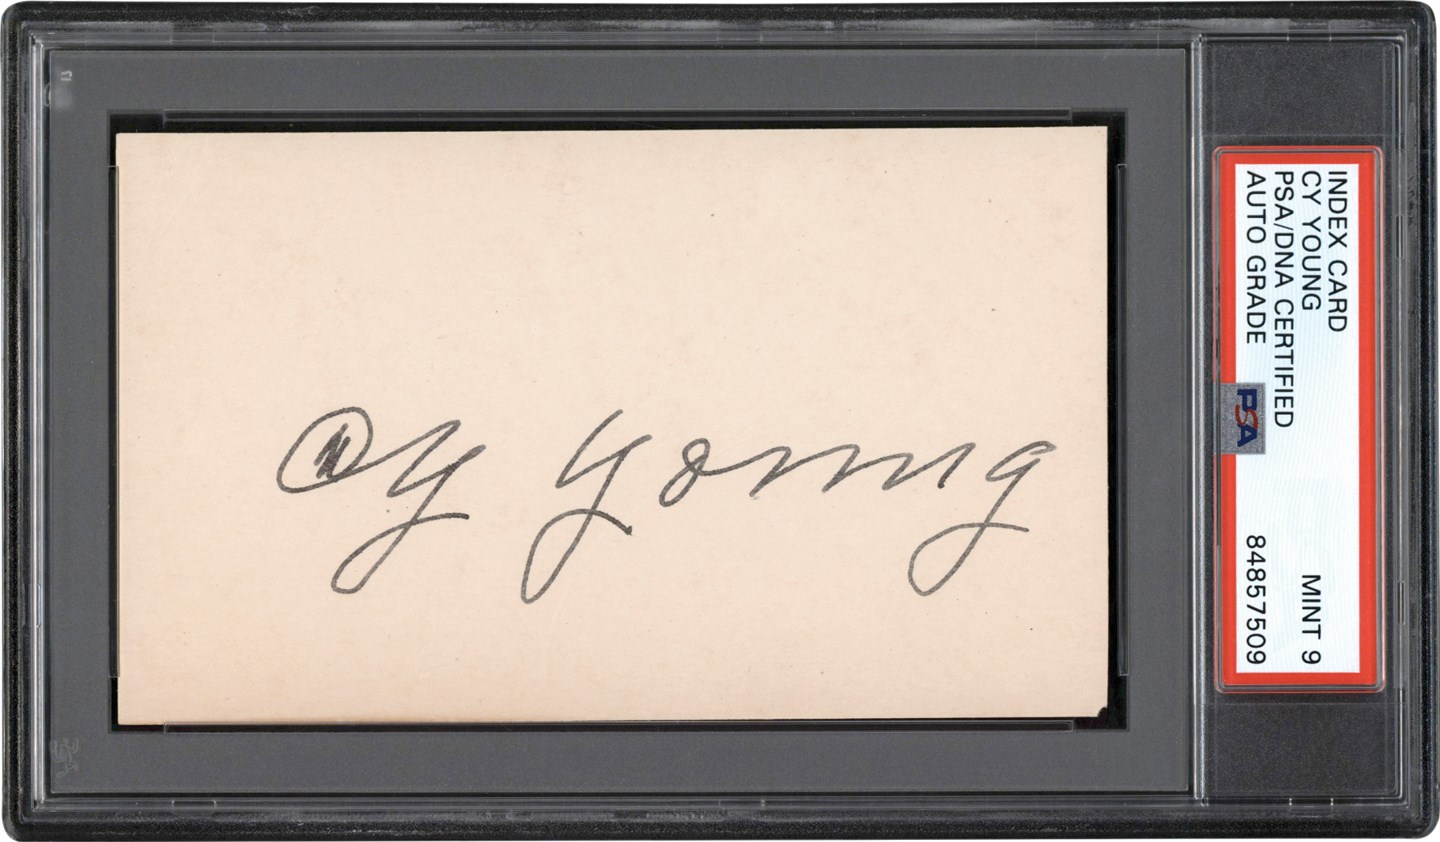 Baseball Autographs - Cy Young Signed Index Card (PSA MINT 9 Auto)